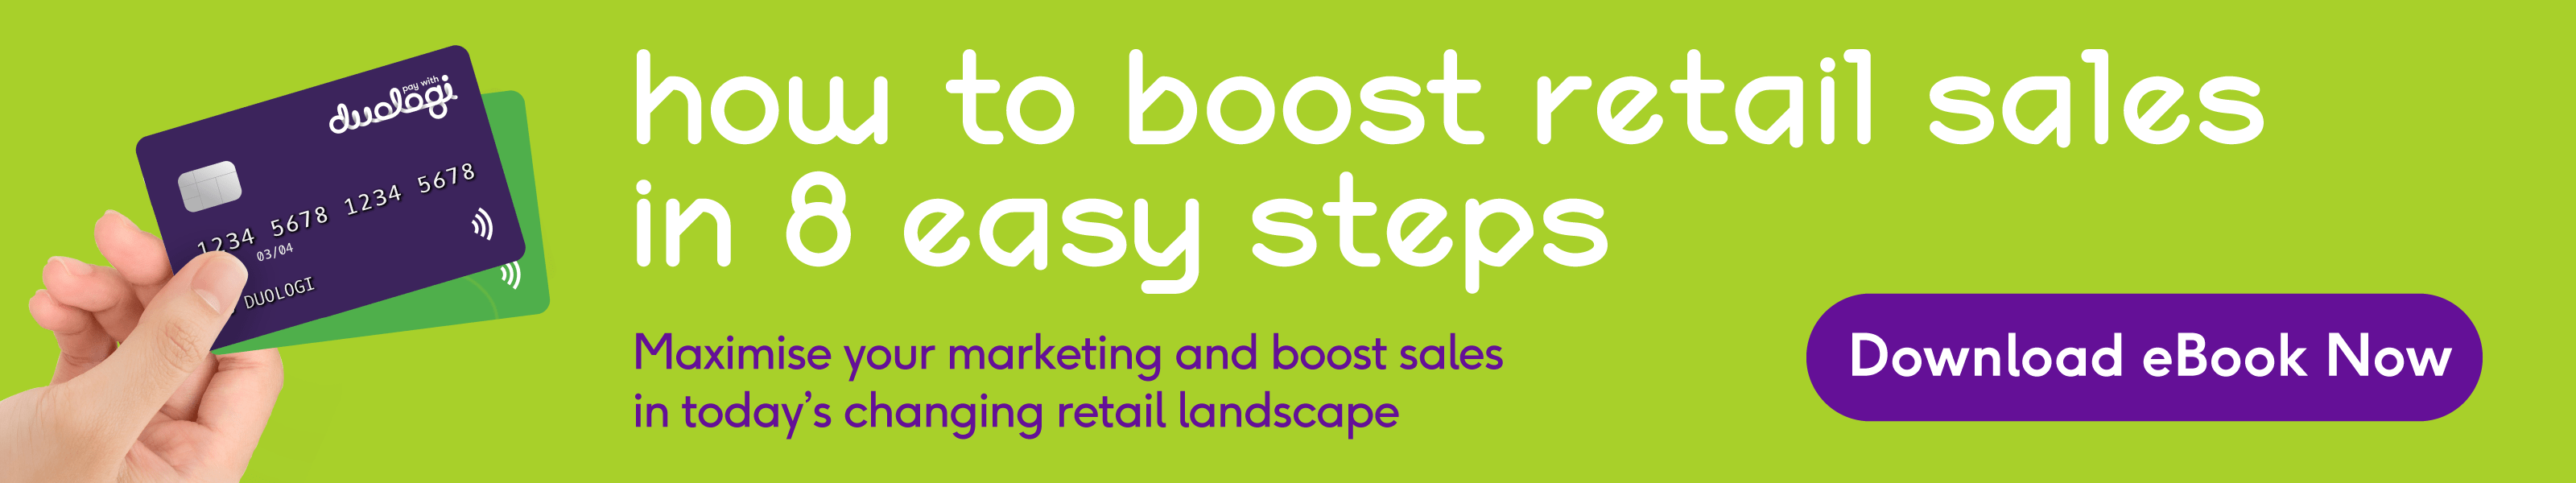 How to Boost Retail Sales in 8 Easy Steps - Download eBook Now